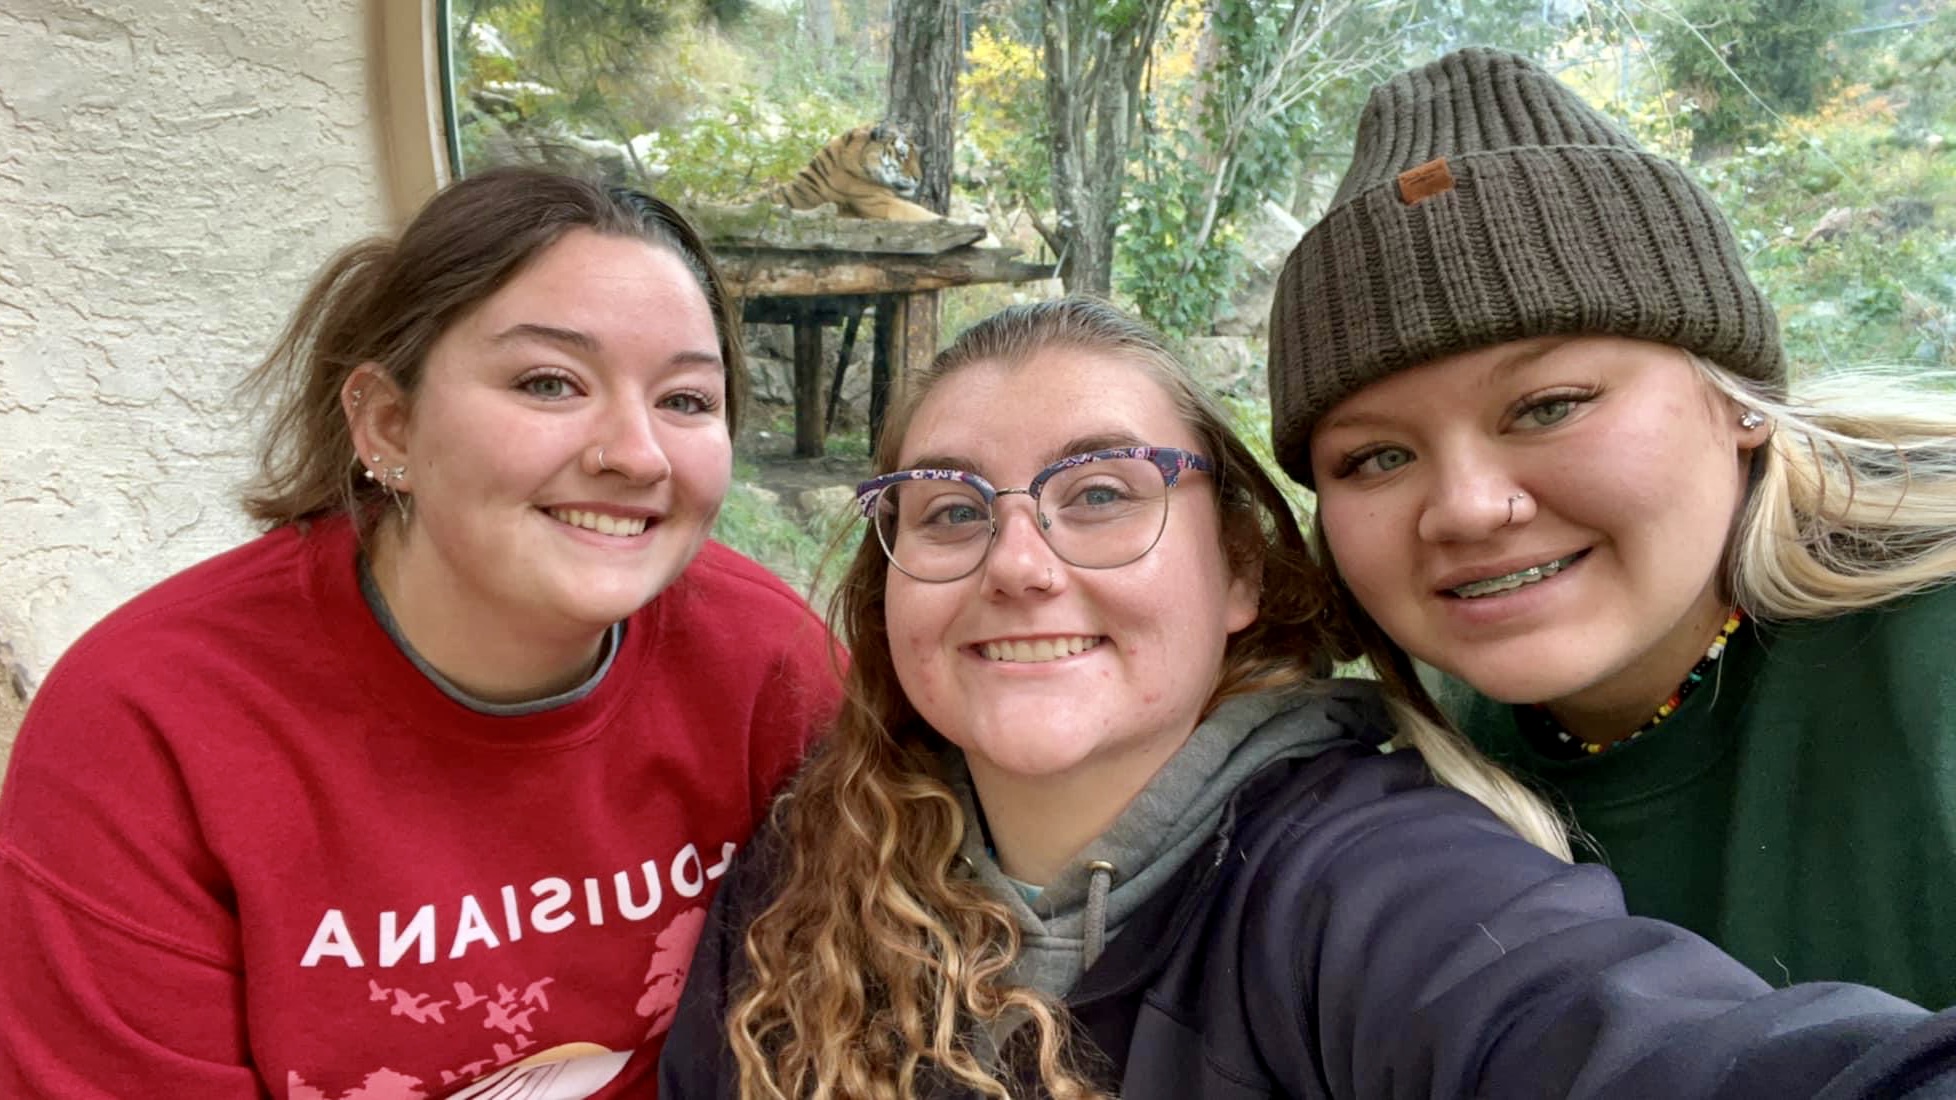 Veterinary Technology students (L-R) Jayden Robinson, Axtell; Shelby Kofler, McCook; and Elizabeth Schaffert, Culbertson are out on their internships in preparation to graduate in May.